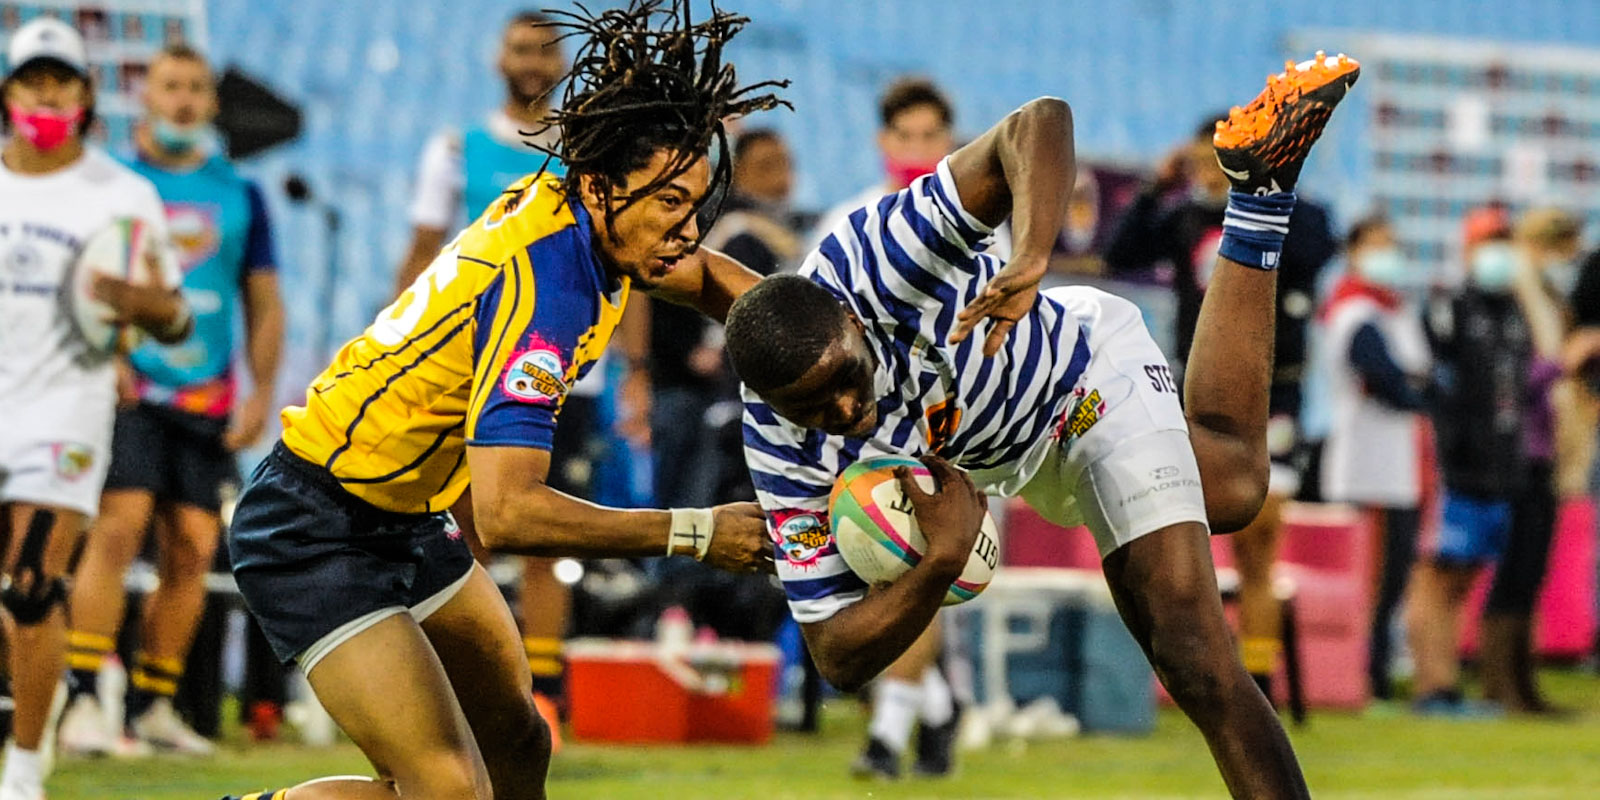 The Cape derby between UCT and UWC was a very tight affair.